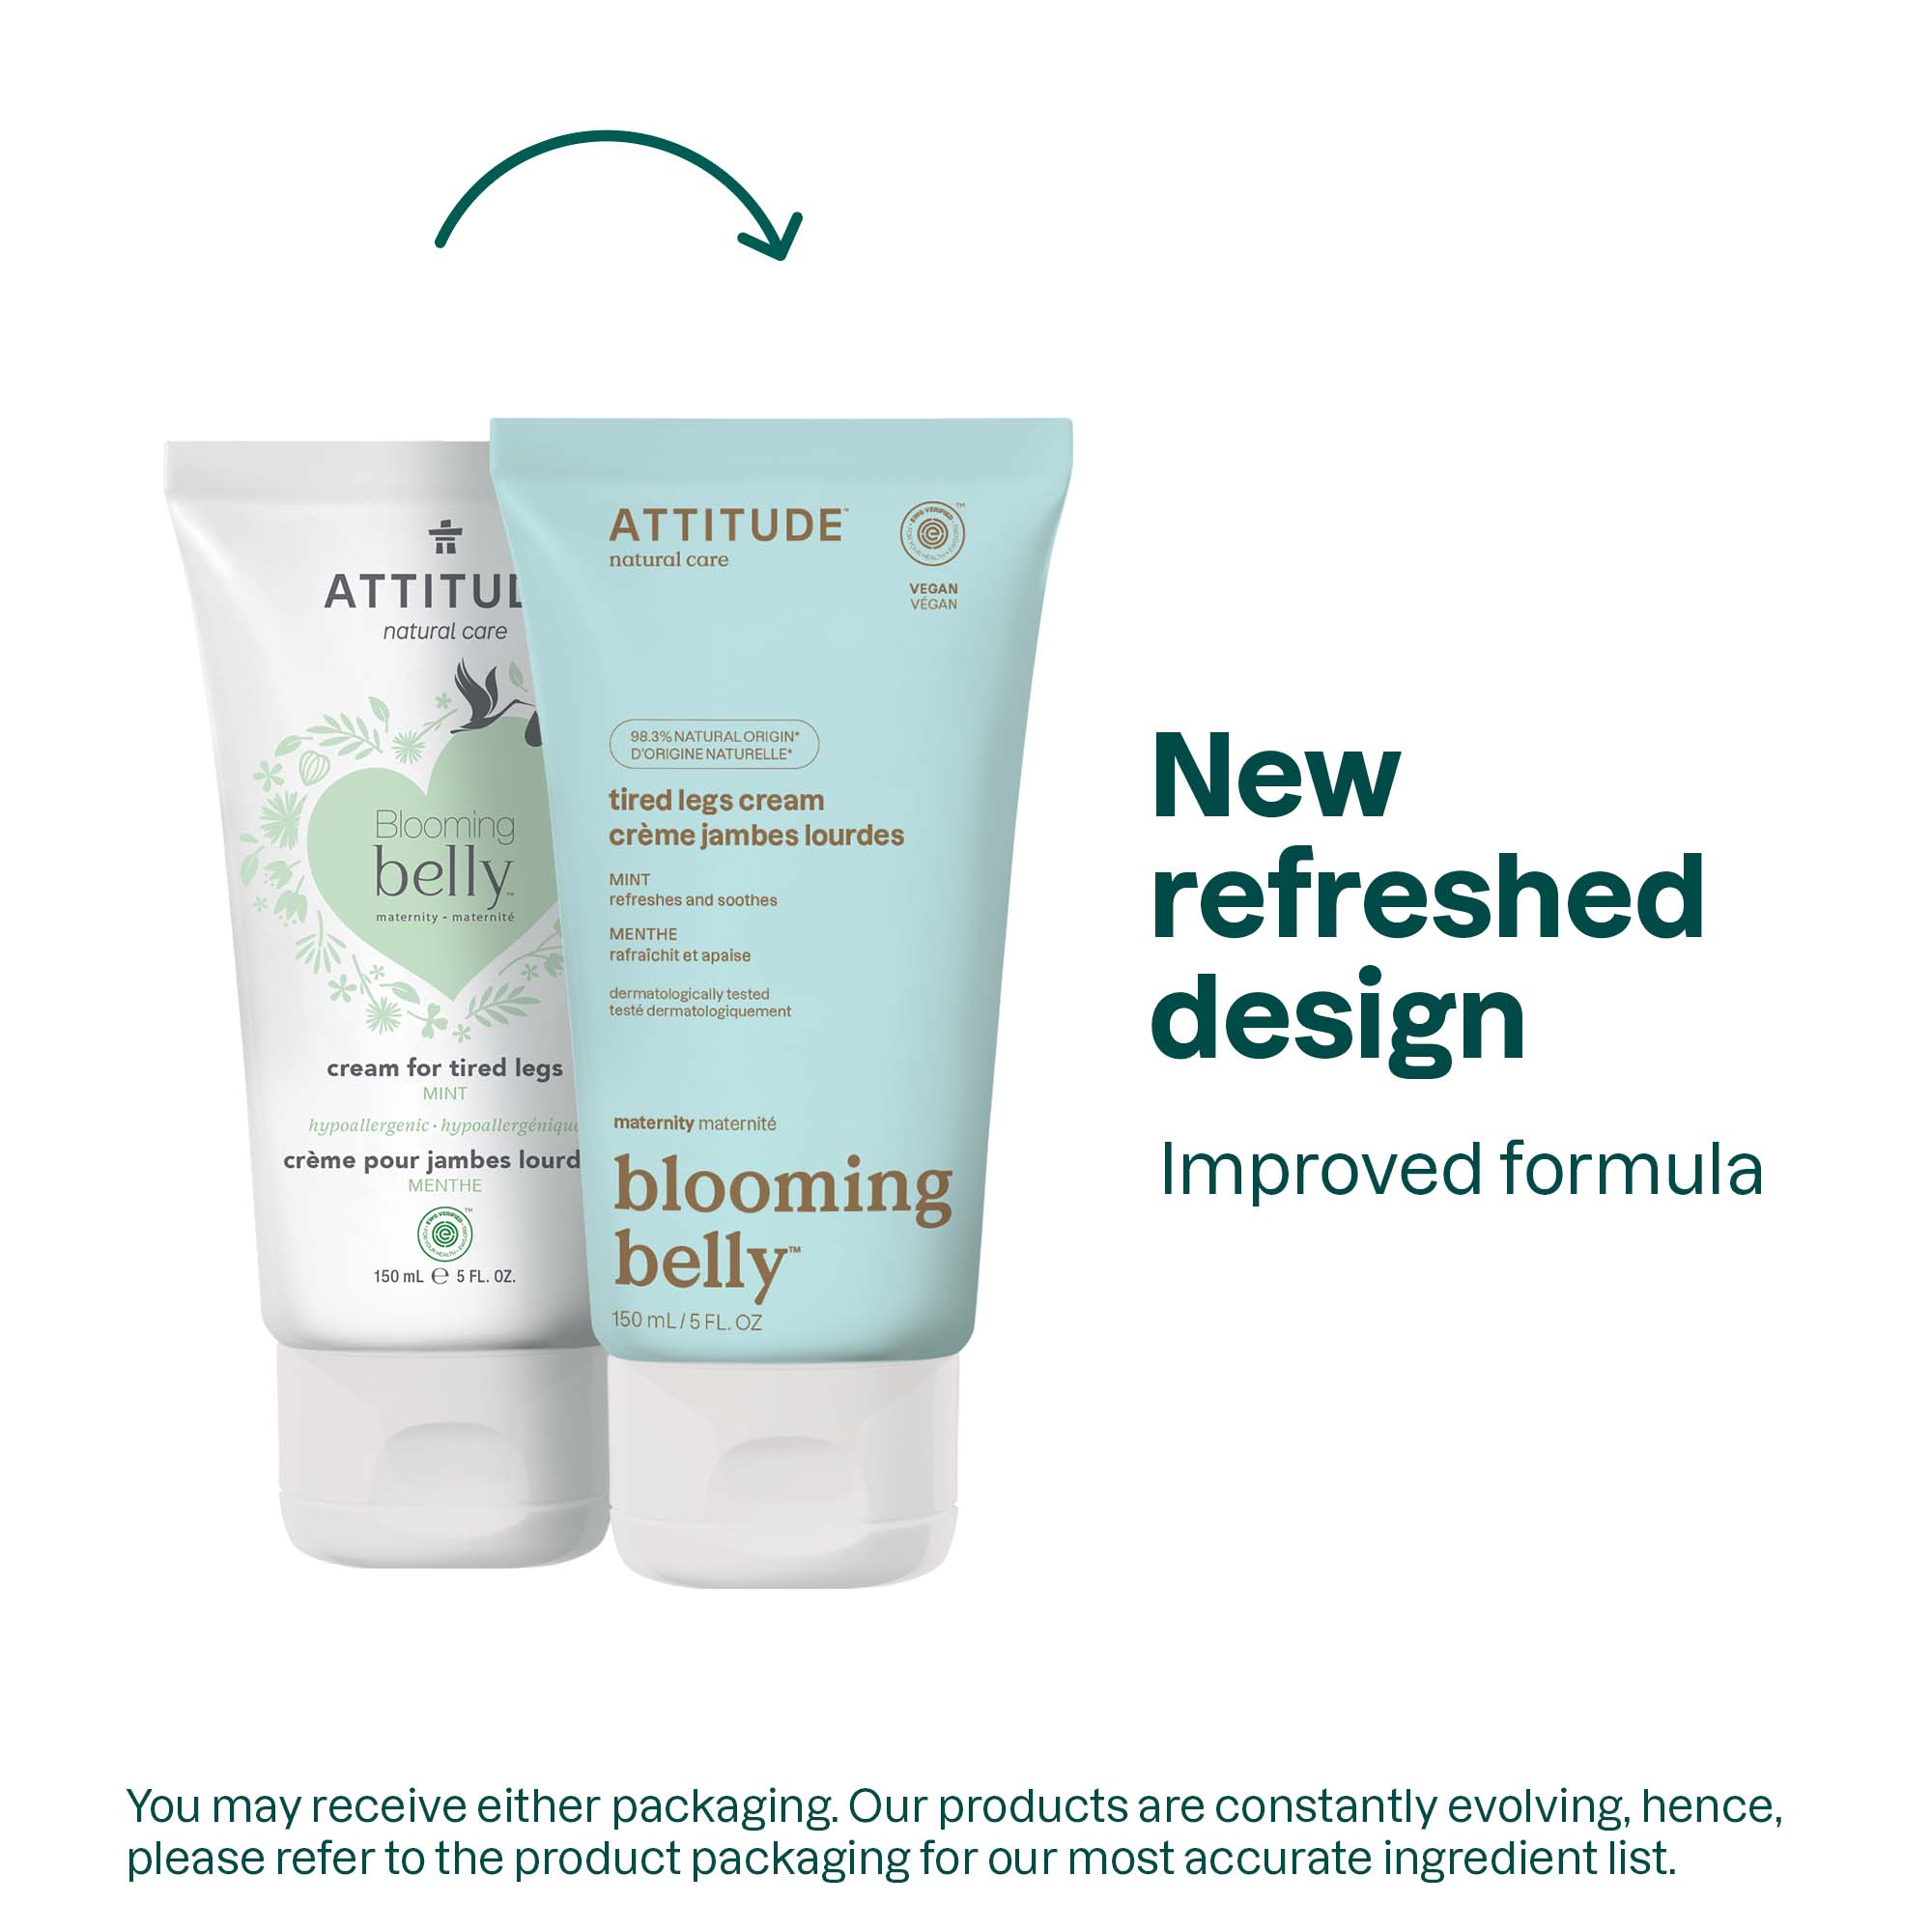 ATTITUDE Blooming belly™ Cream For Tired Legs Mint 18191_en? 150 mL